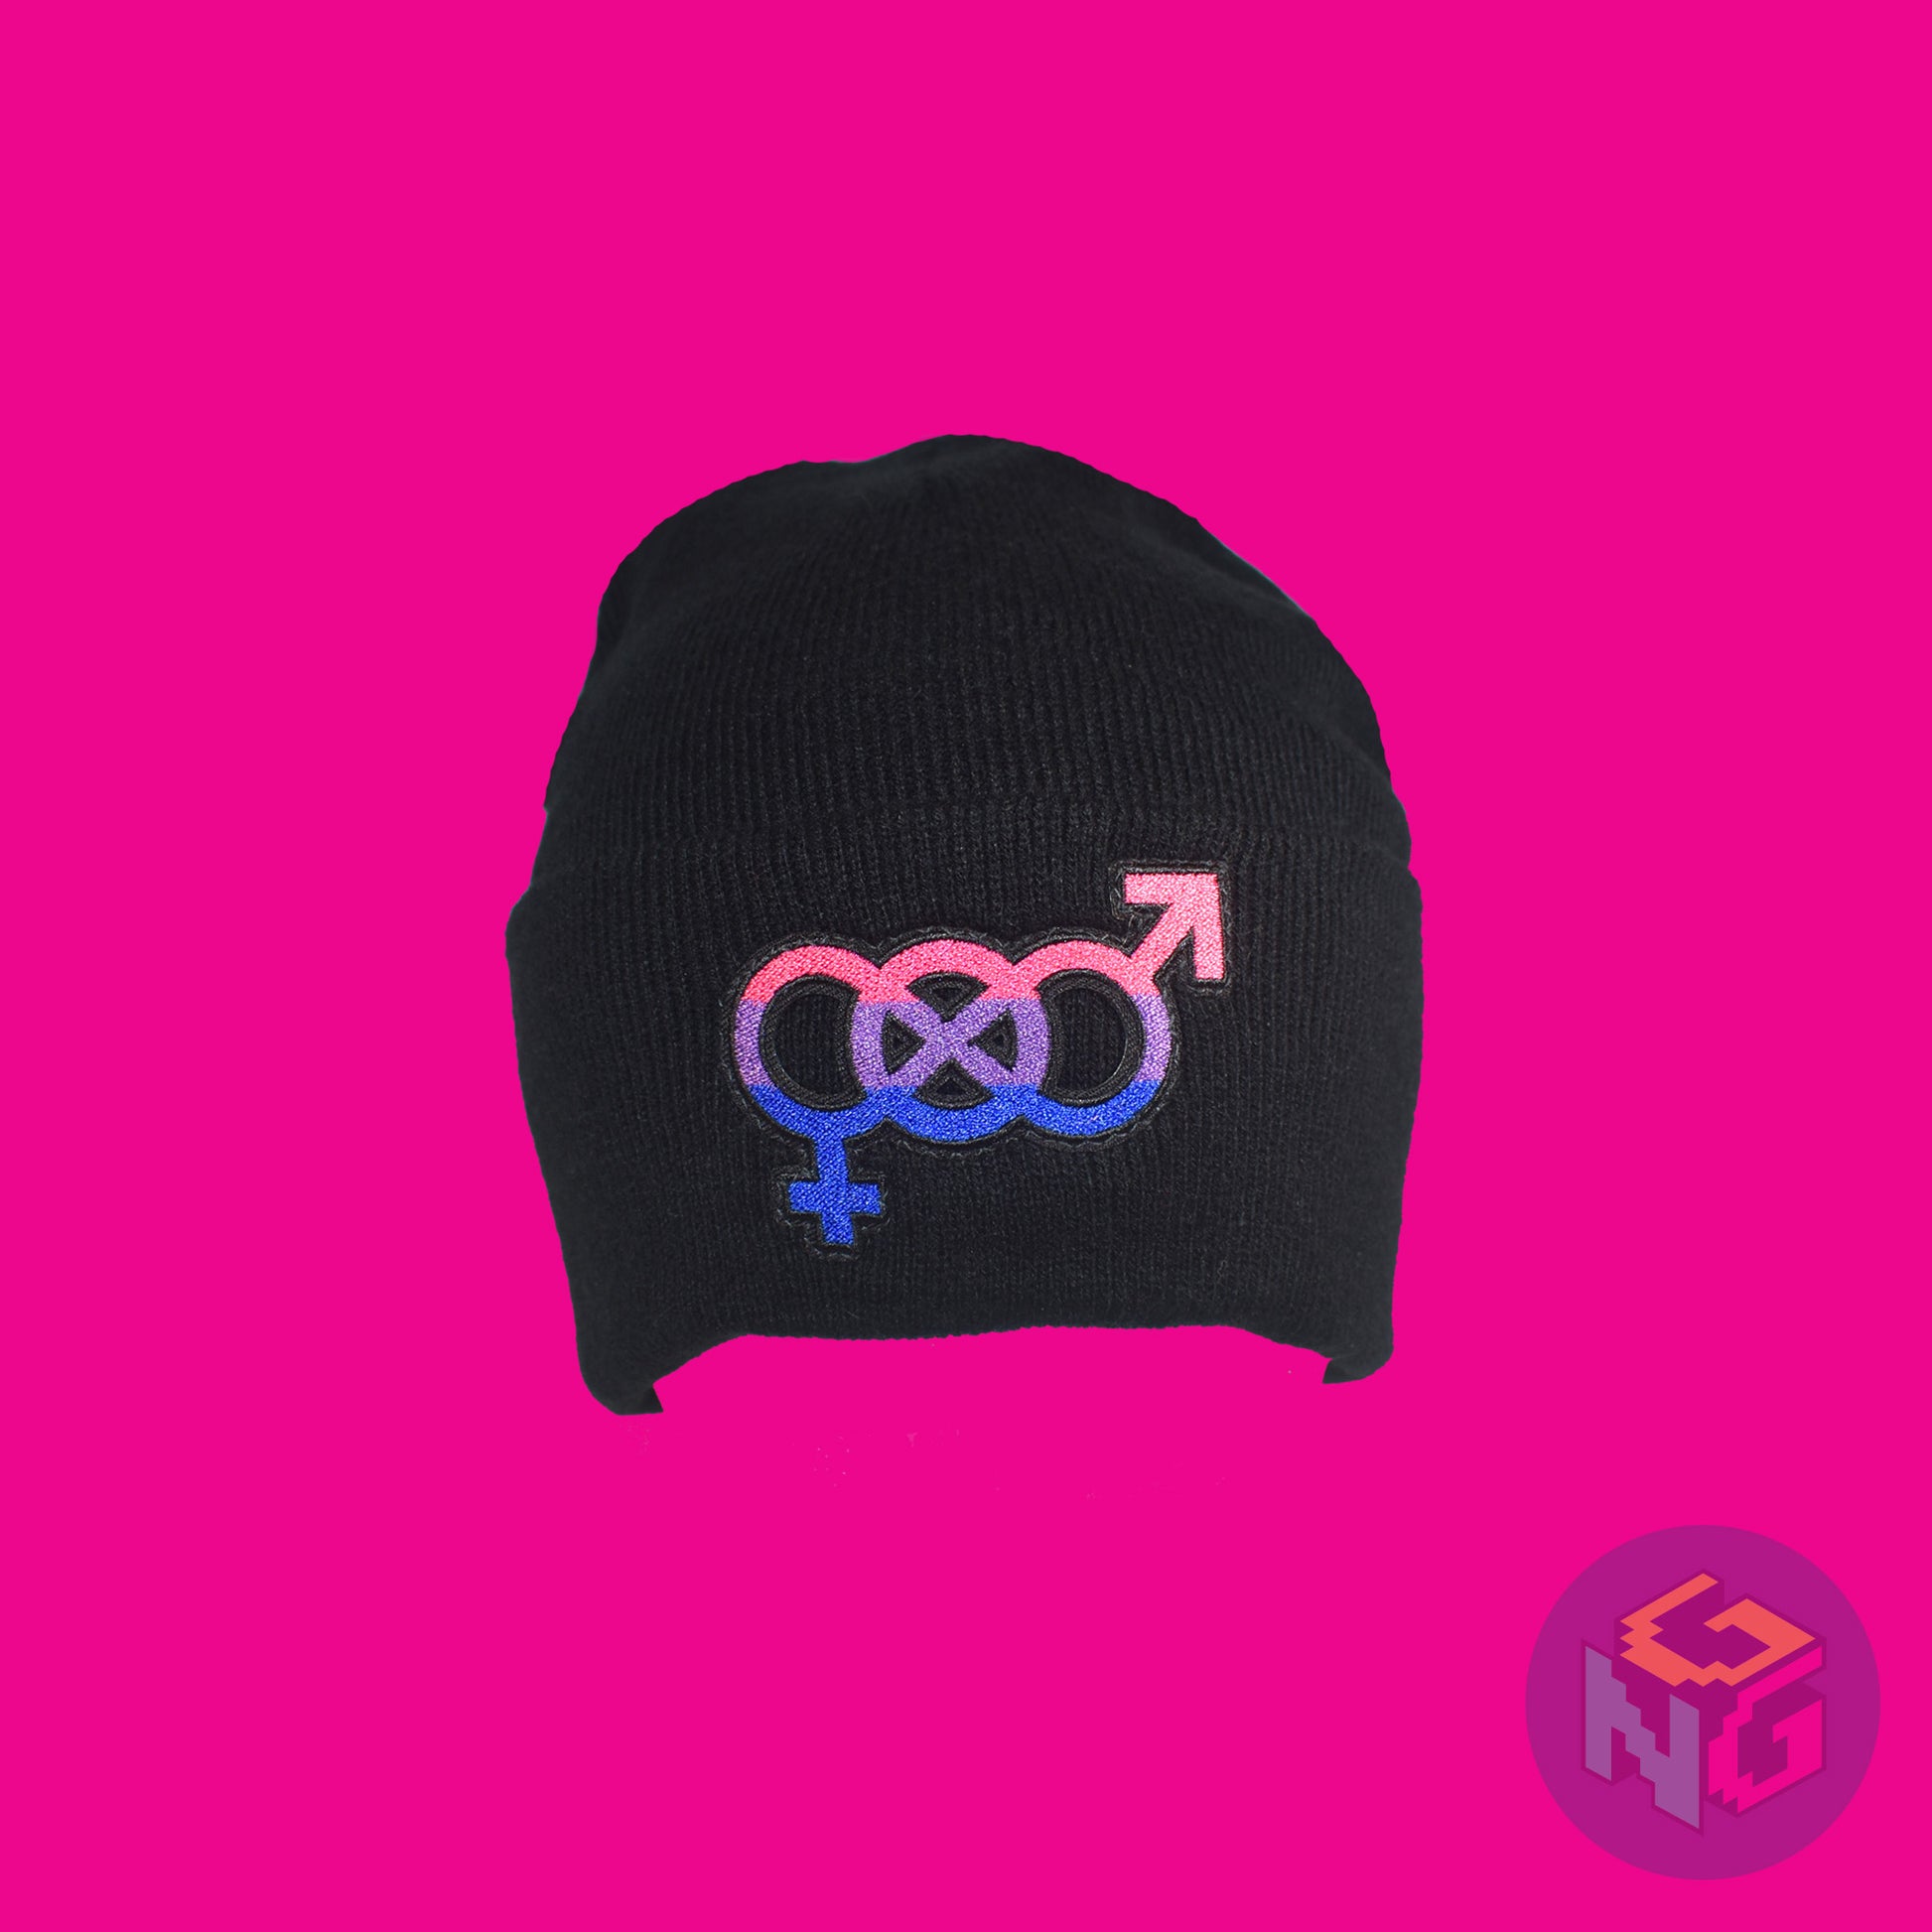 Black knit fabric beanie with the bisexual symbol in asexual pink, purple, and blue on the front. It is viewed from the front and stretched on pink background